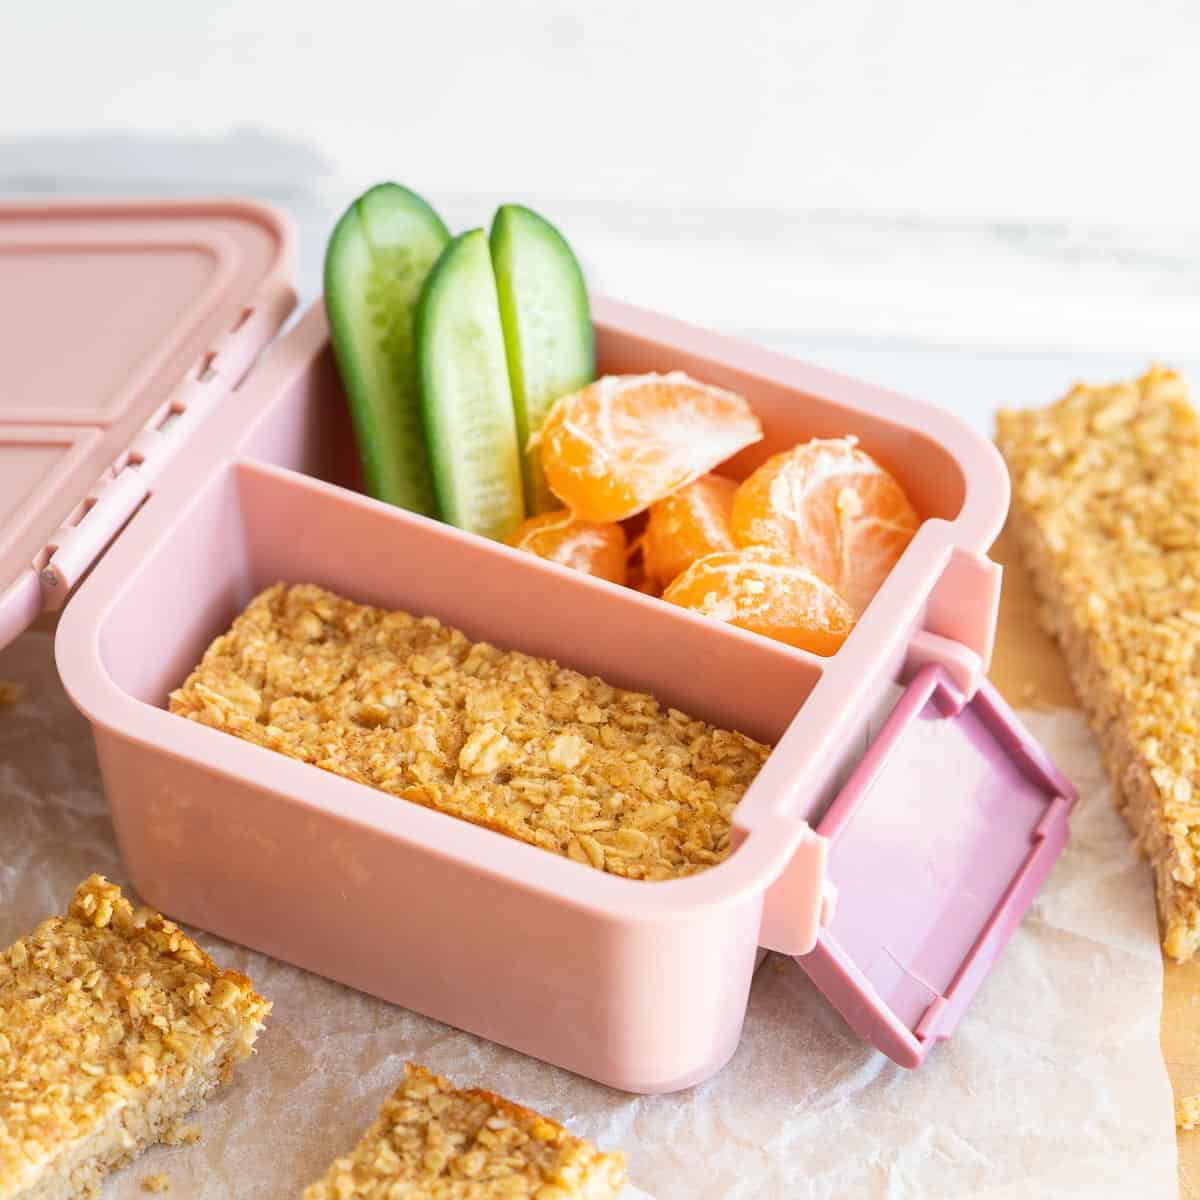 Oat bars packed into a pink bento lunch box with cucumber sticks and mandarin segments. 